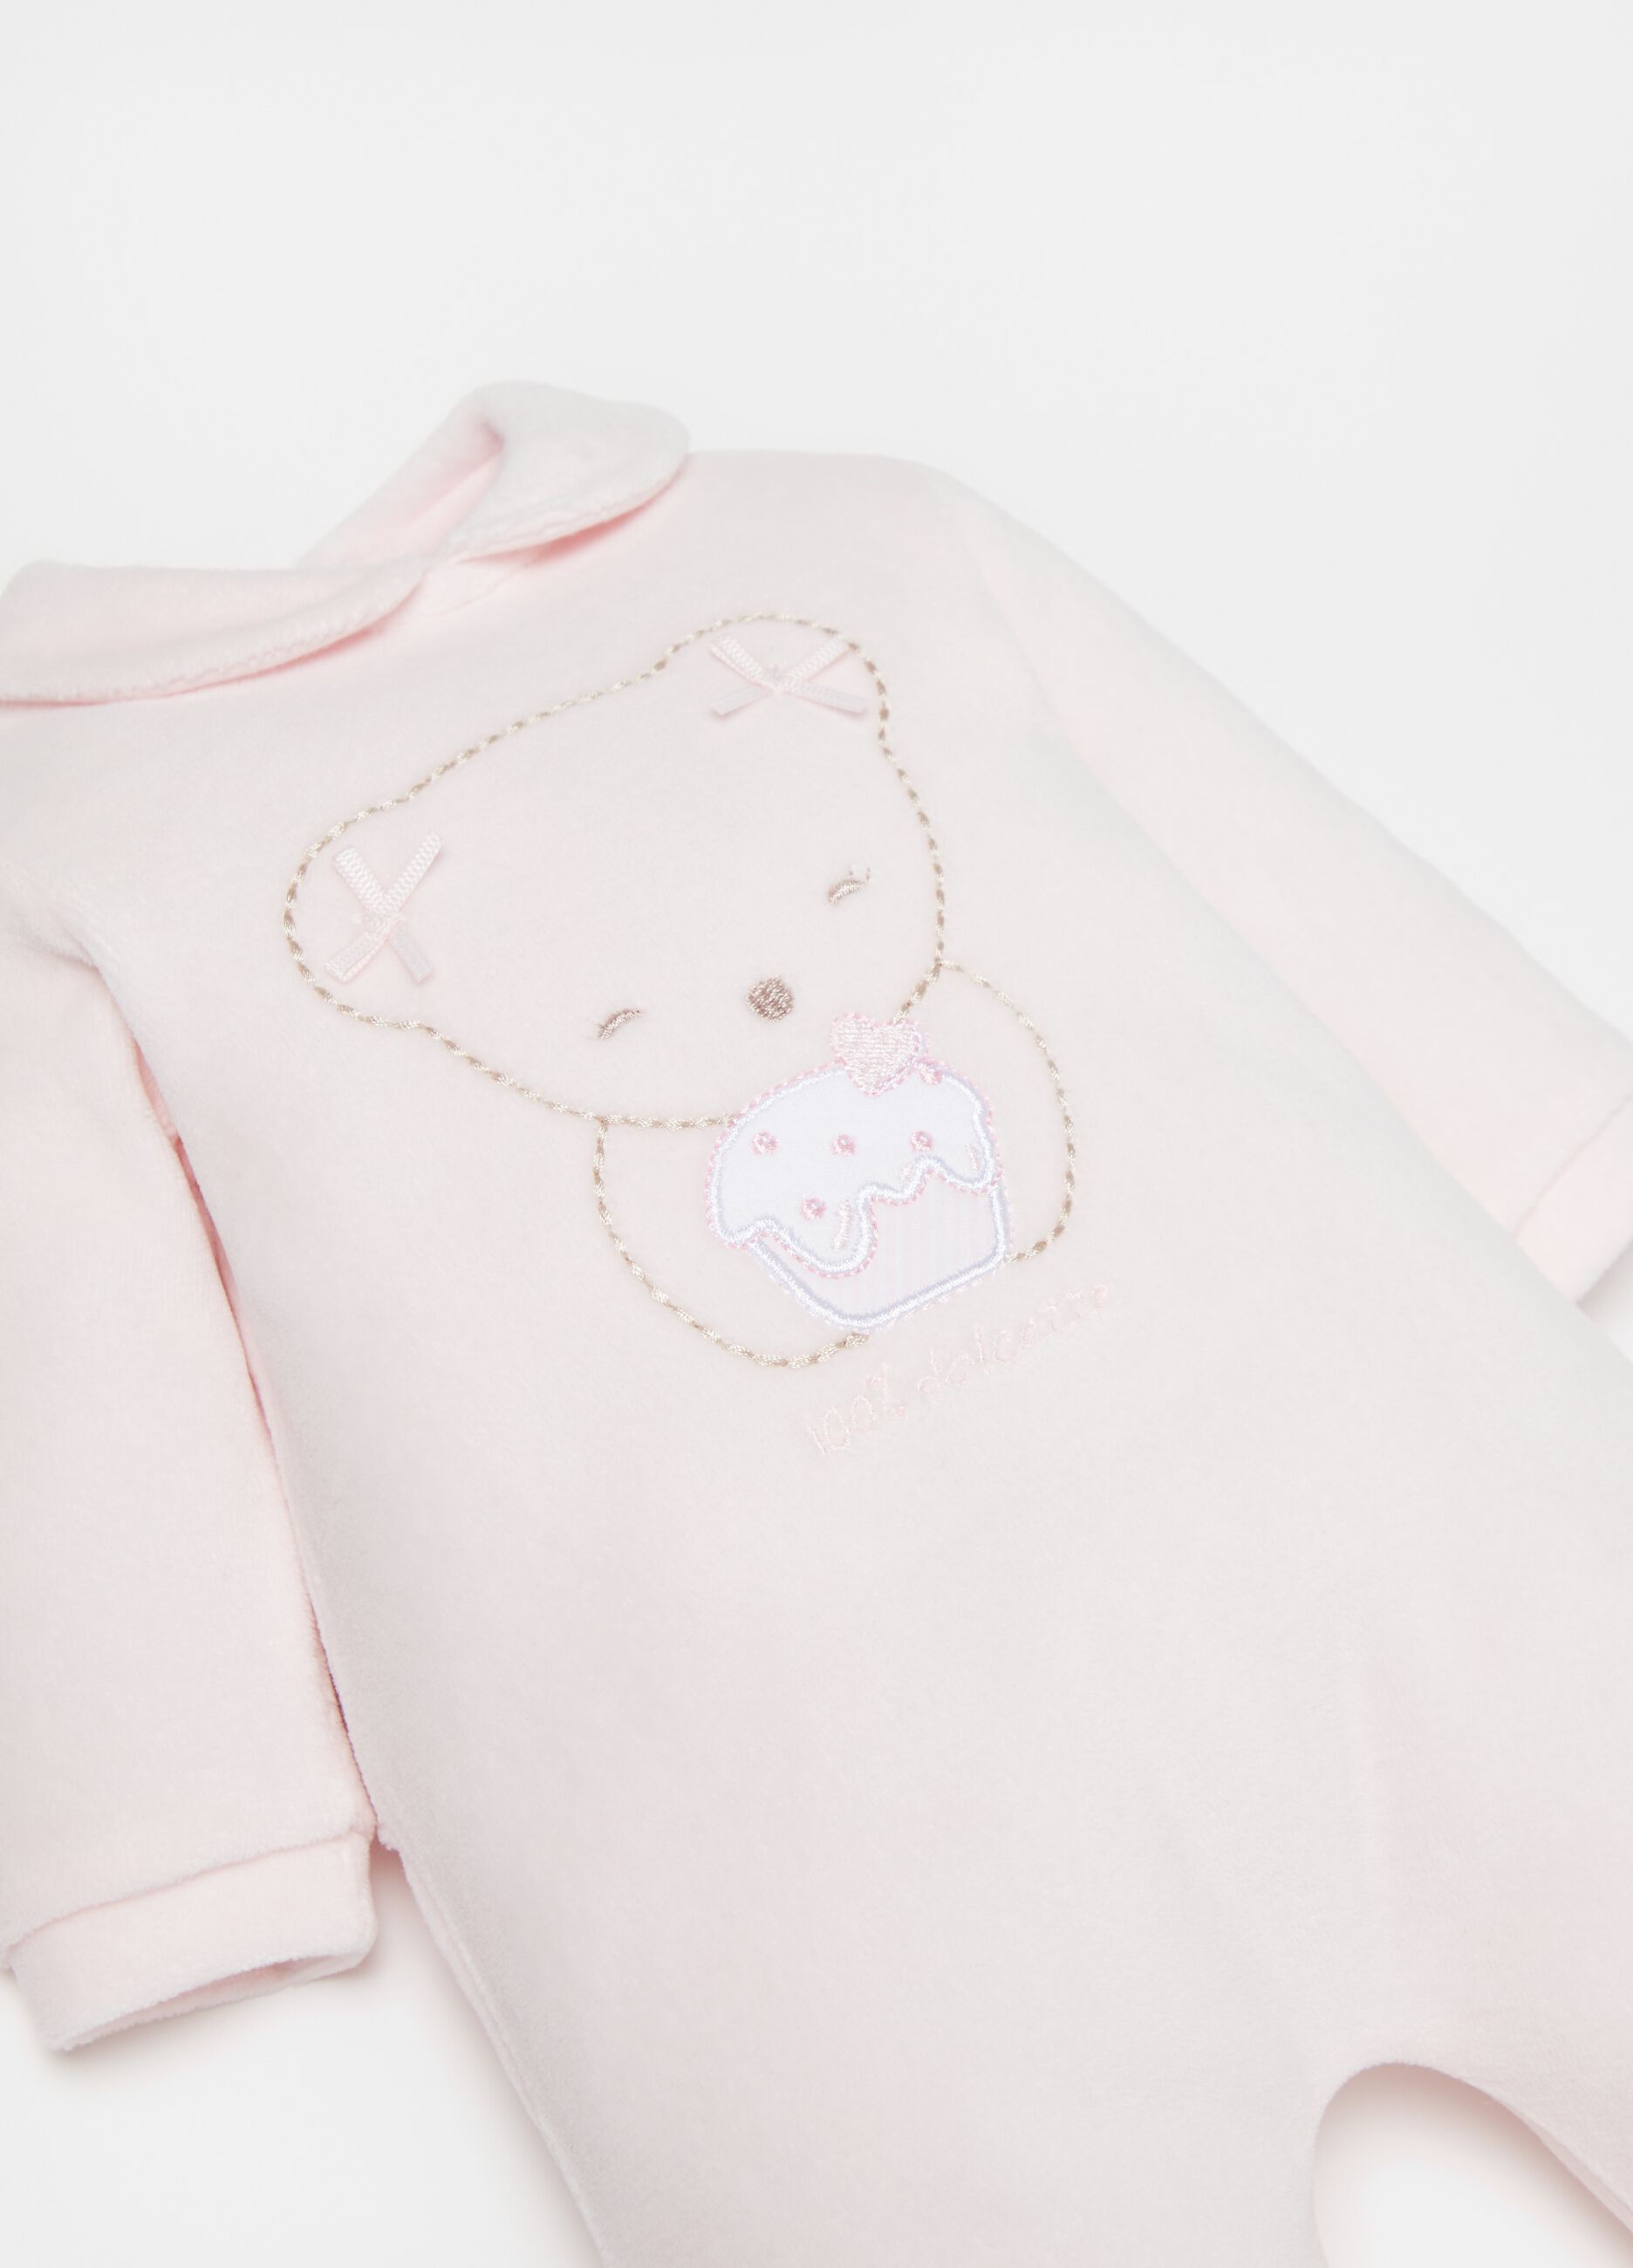 Onesie with girl teddy bear and pastry embroidery